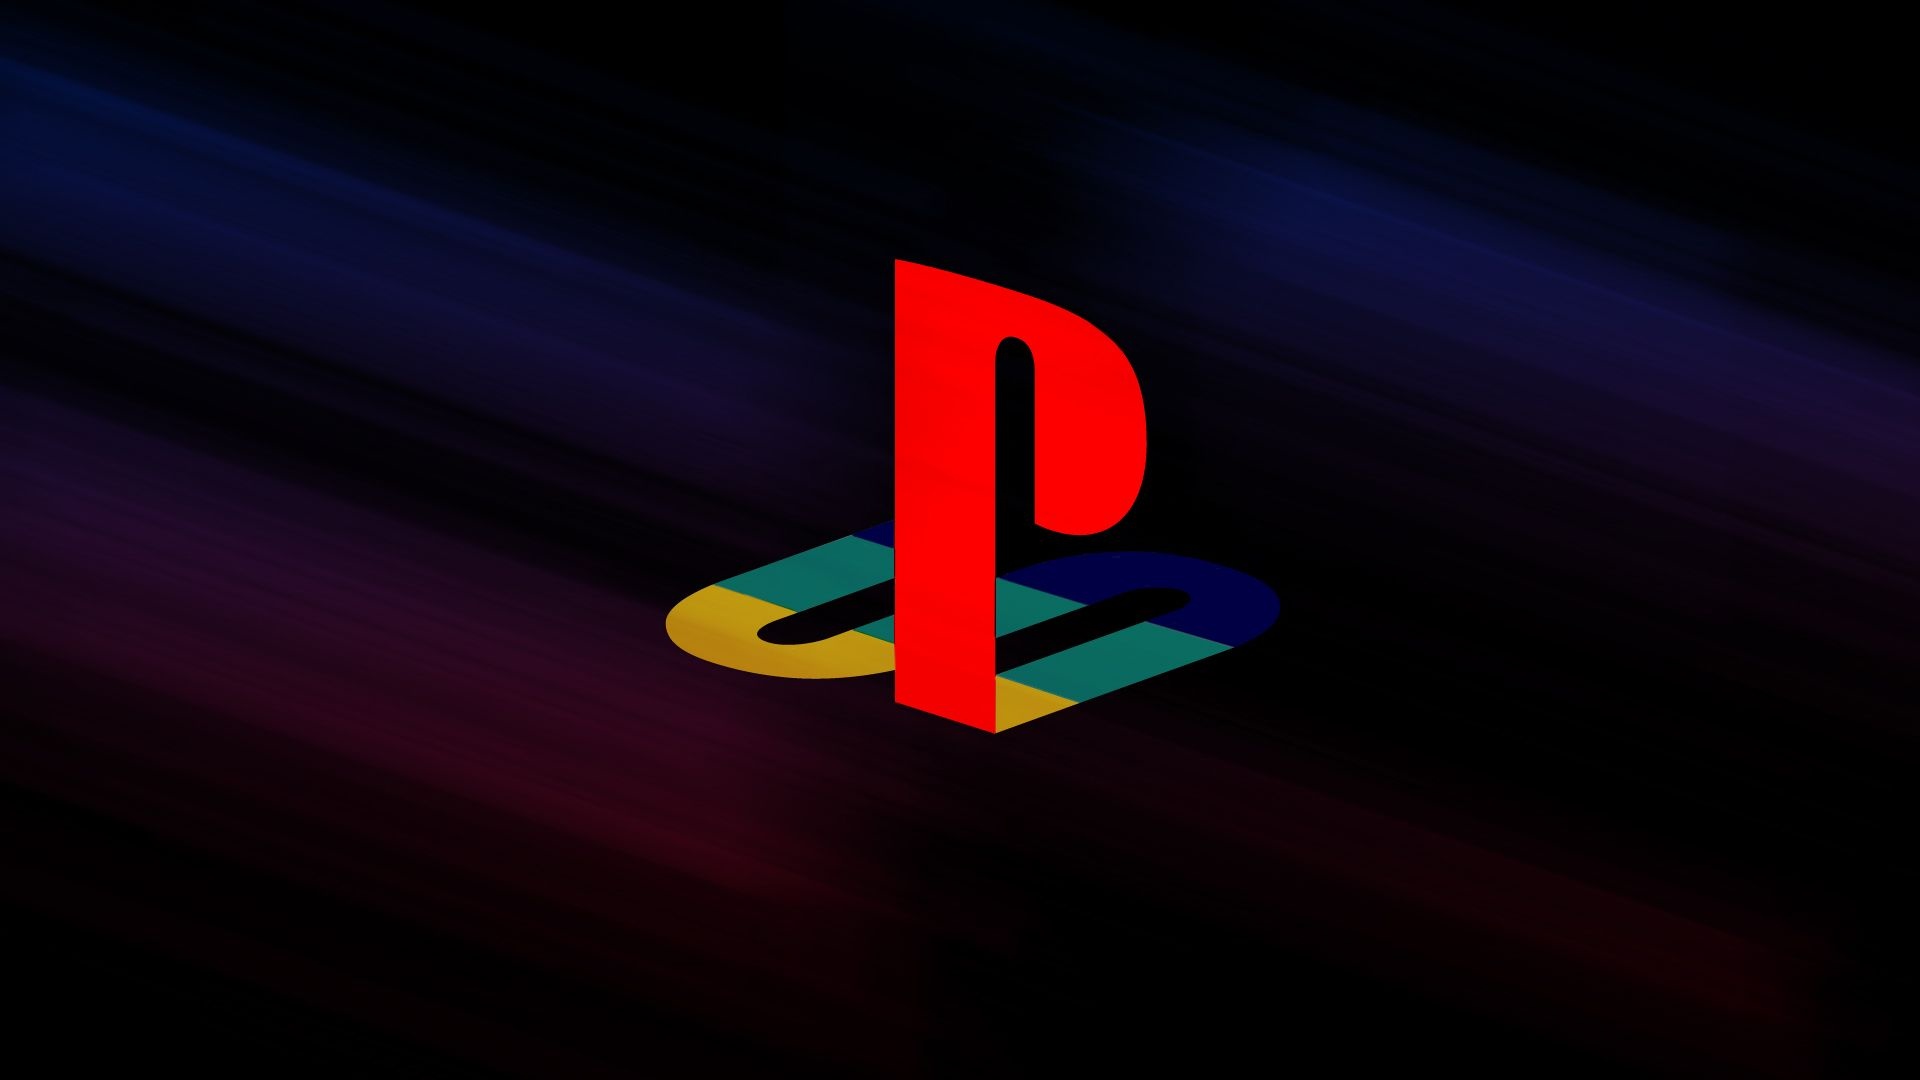 Sony PlayStation wallpapers, Gamers' choice, Customizable backgrounds, Console personalization, 1920x1080 Full HD Desktop